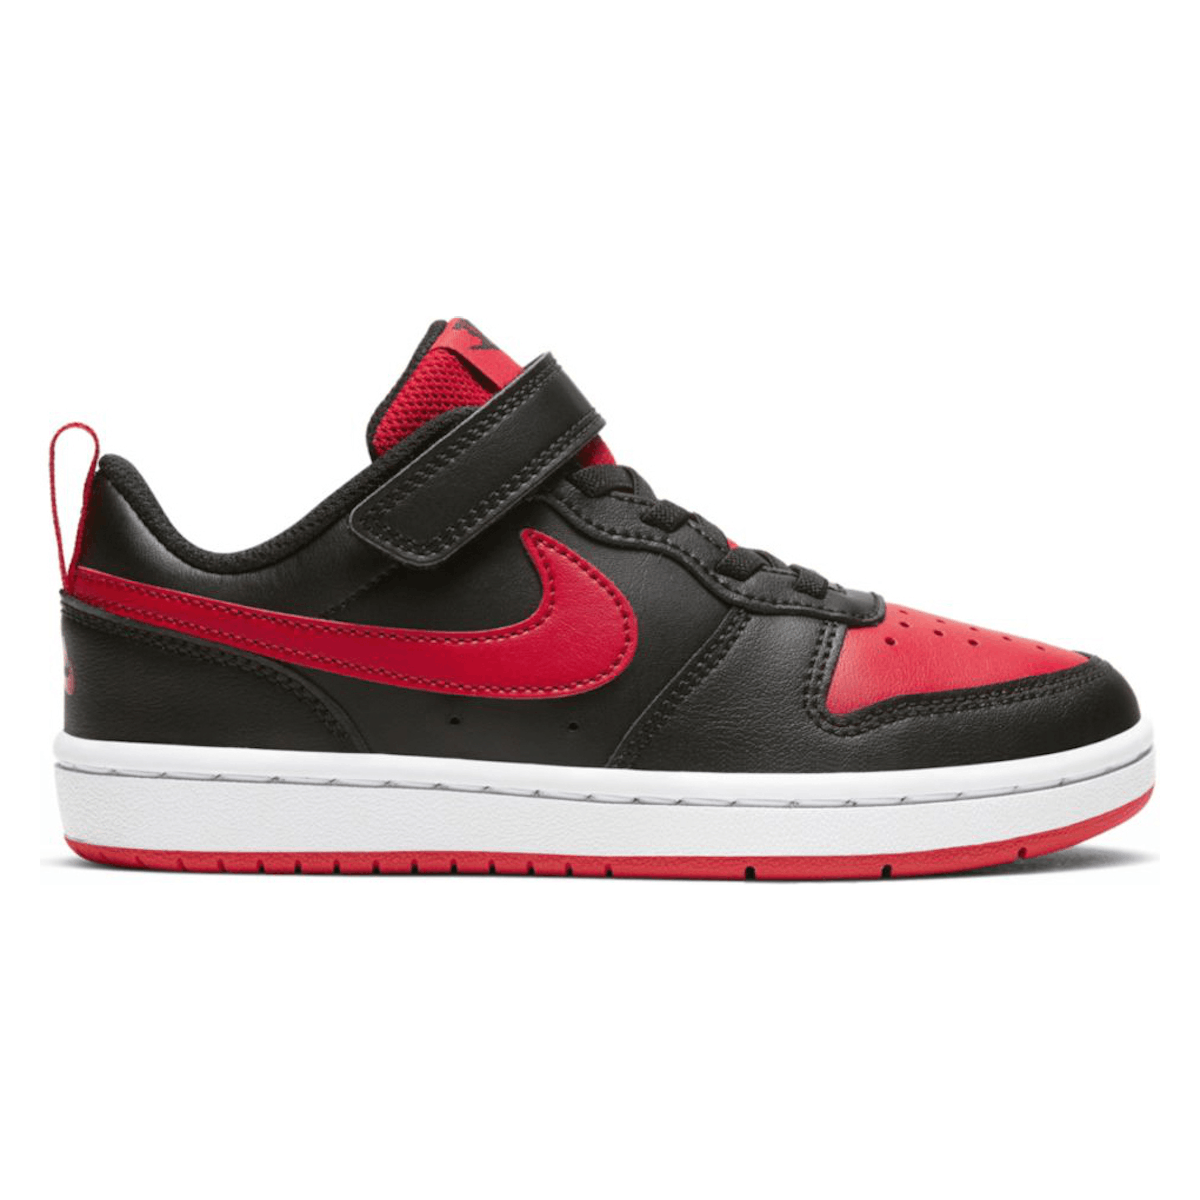 Nike Court Borough Low 2 Bred (PS)